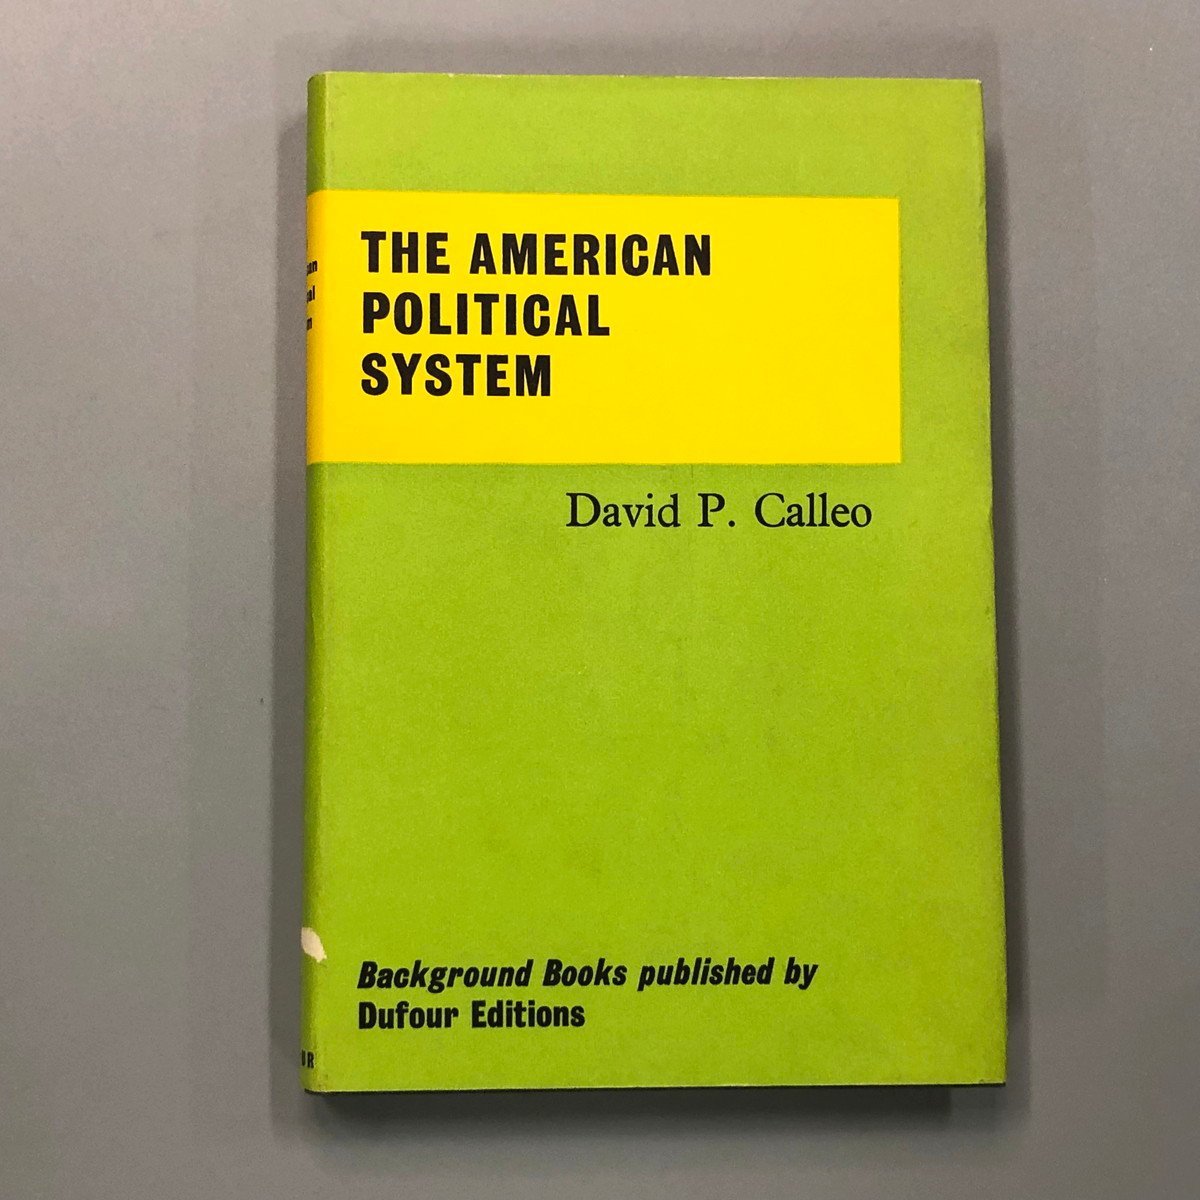 The American Political System by David P. Caleo, Painting, Art Book, Collection, Art Book